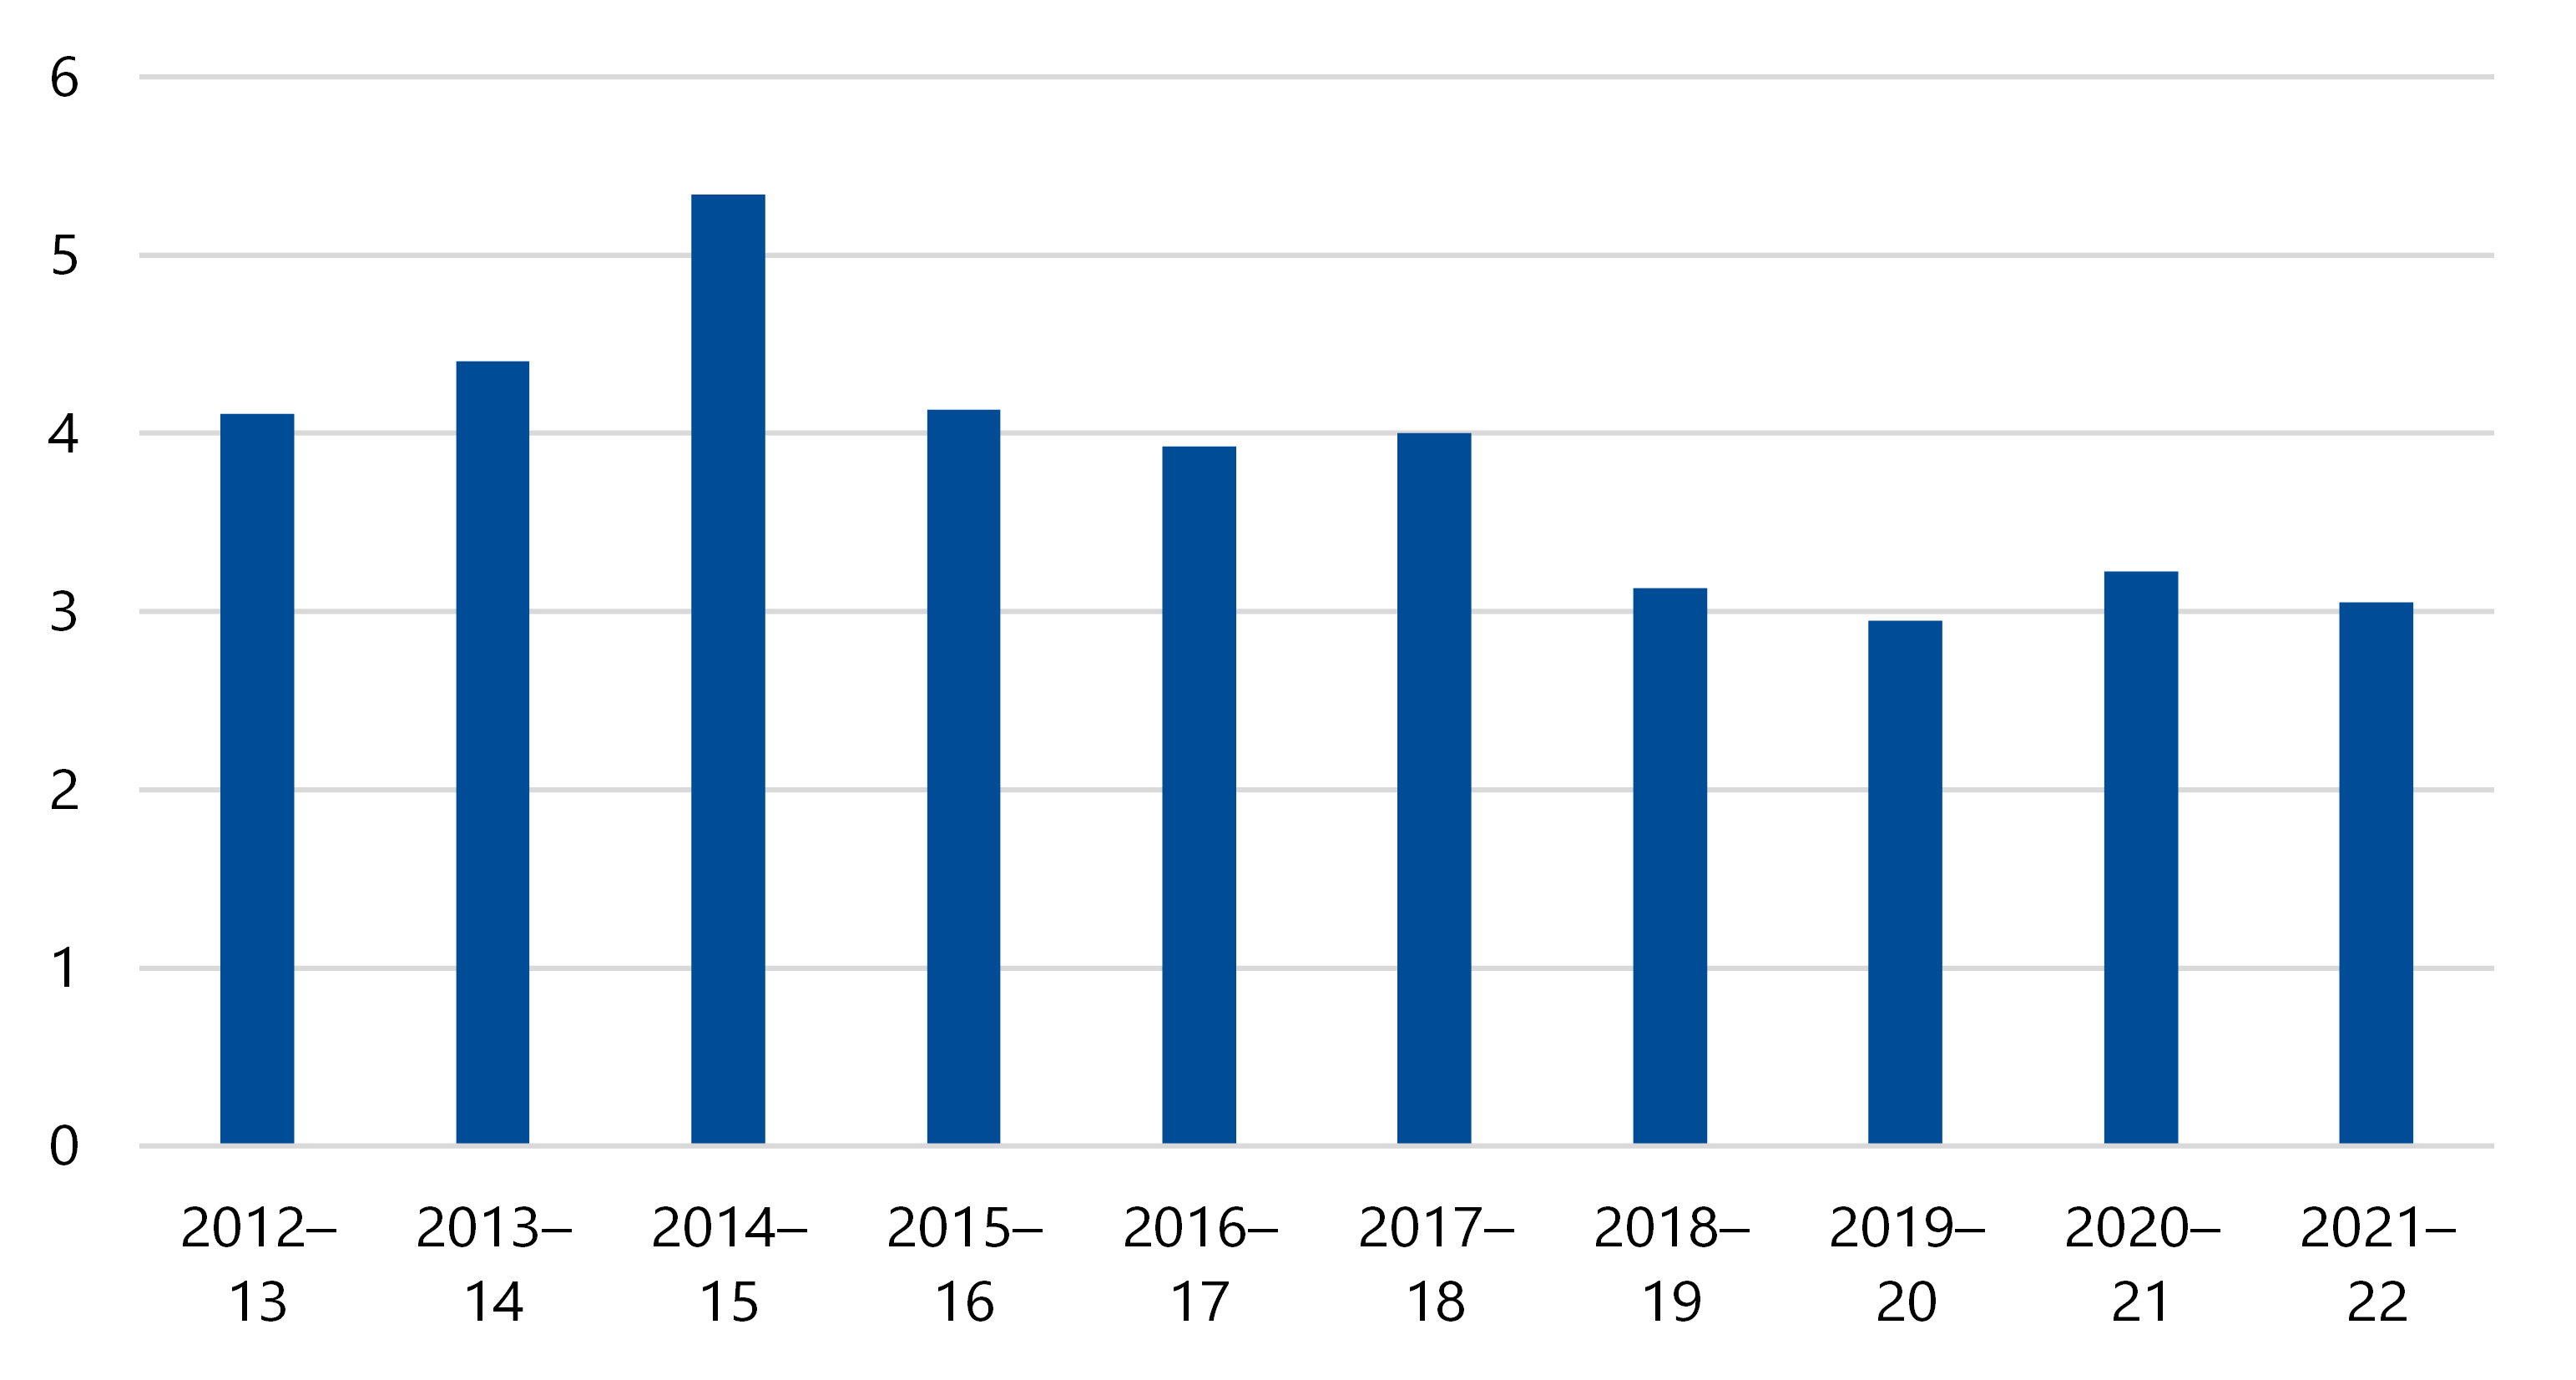 Between 2012–13 and 2021–22, annual amounts paid to the operators under the scheme varied between just under $3 million (in 2019–20) and about $5.3 million (in 2014–15).